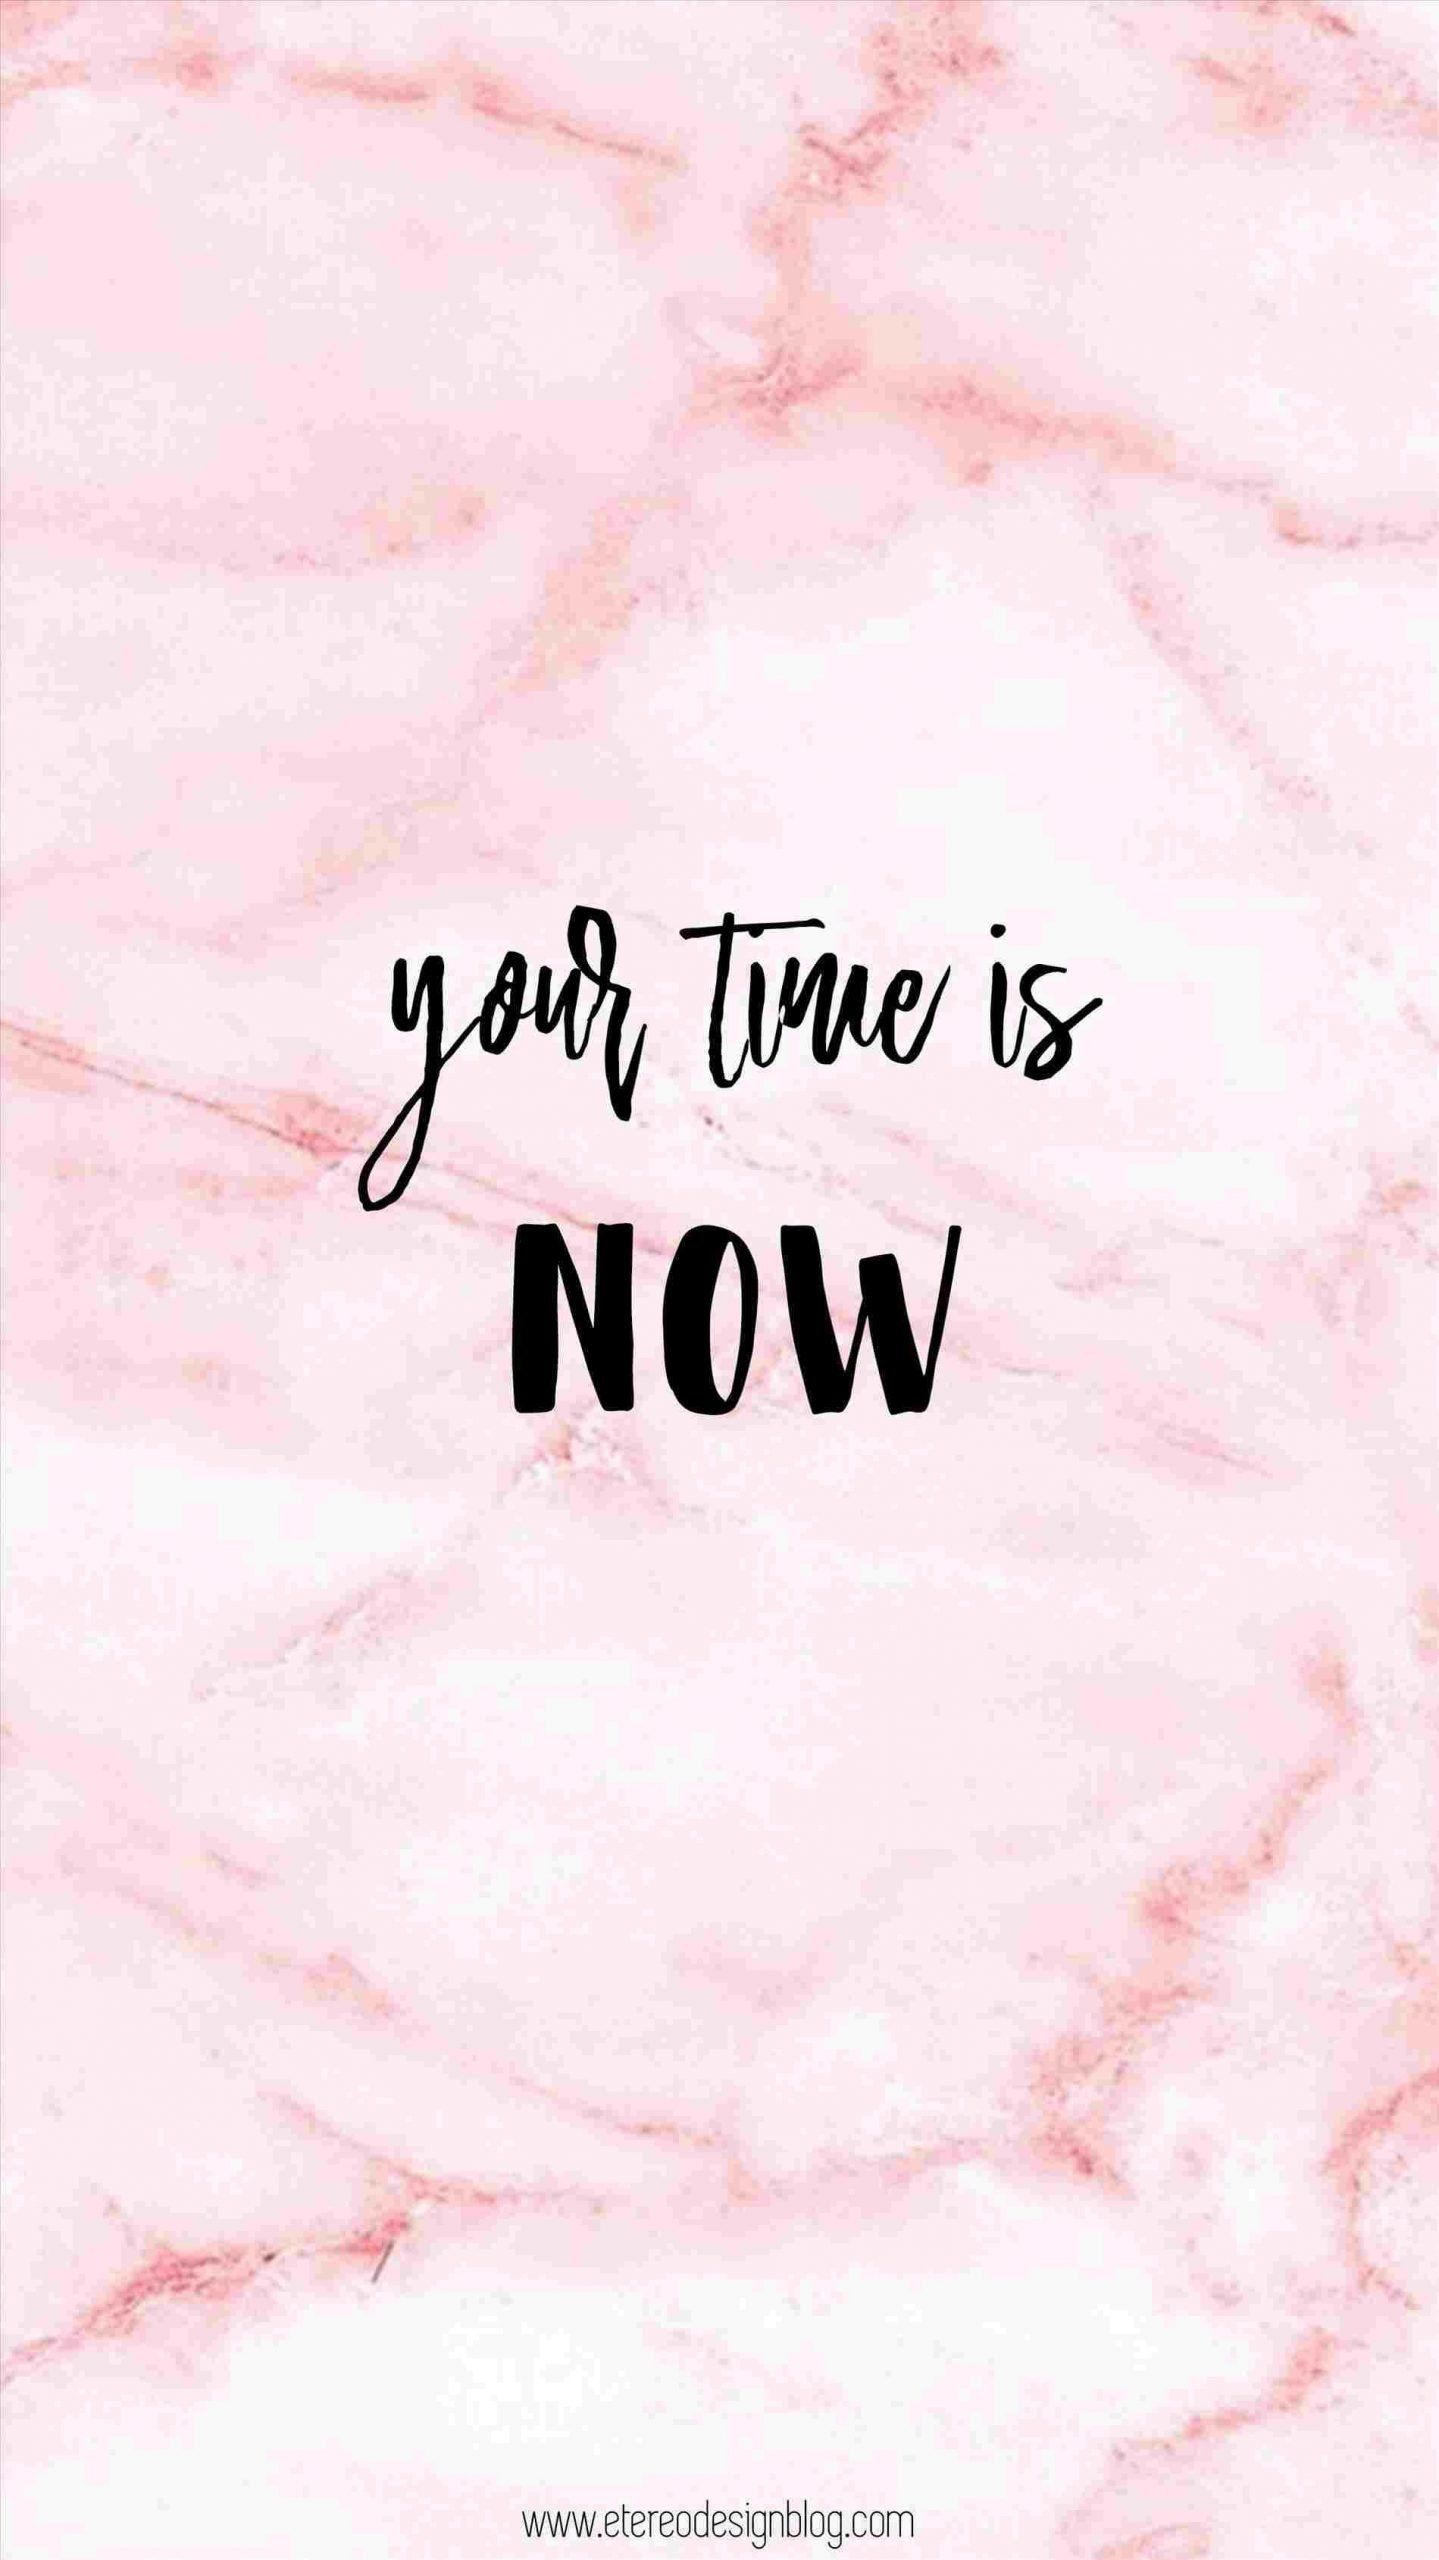 Your time is now, motivational quote on marble background - Rose gold, marble